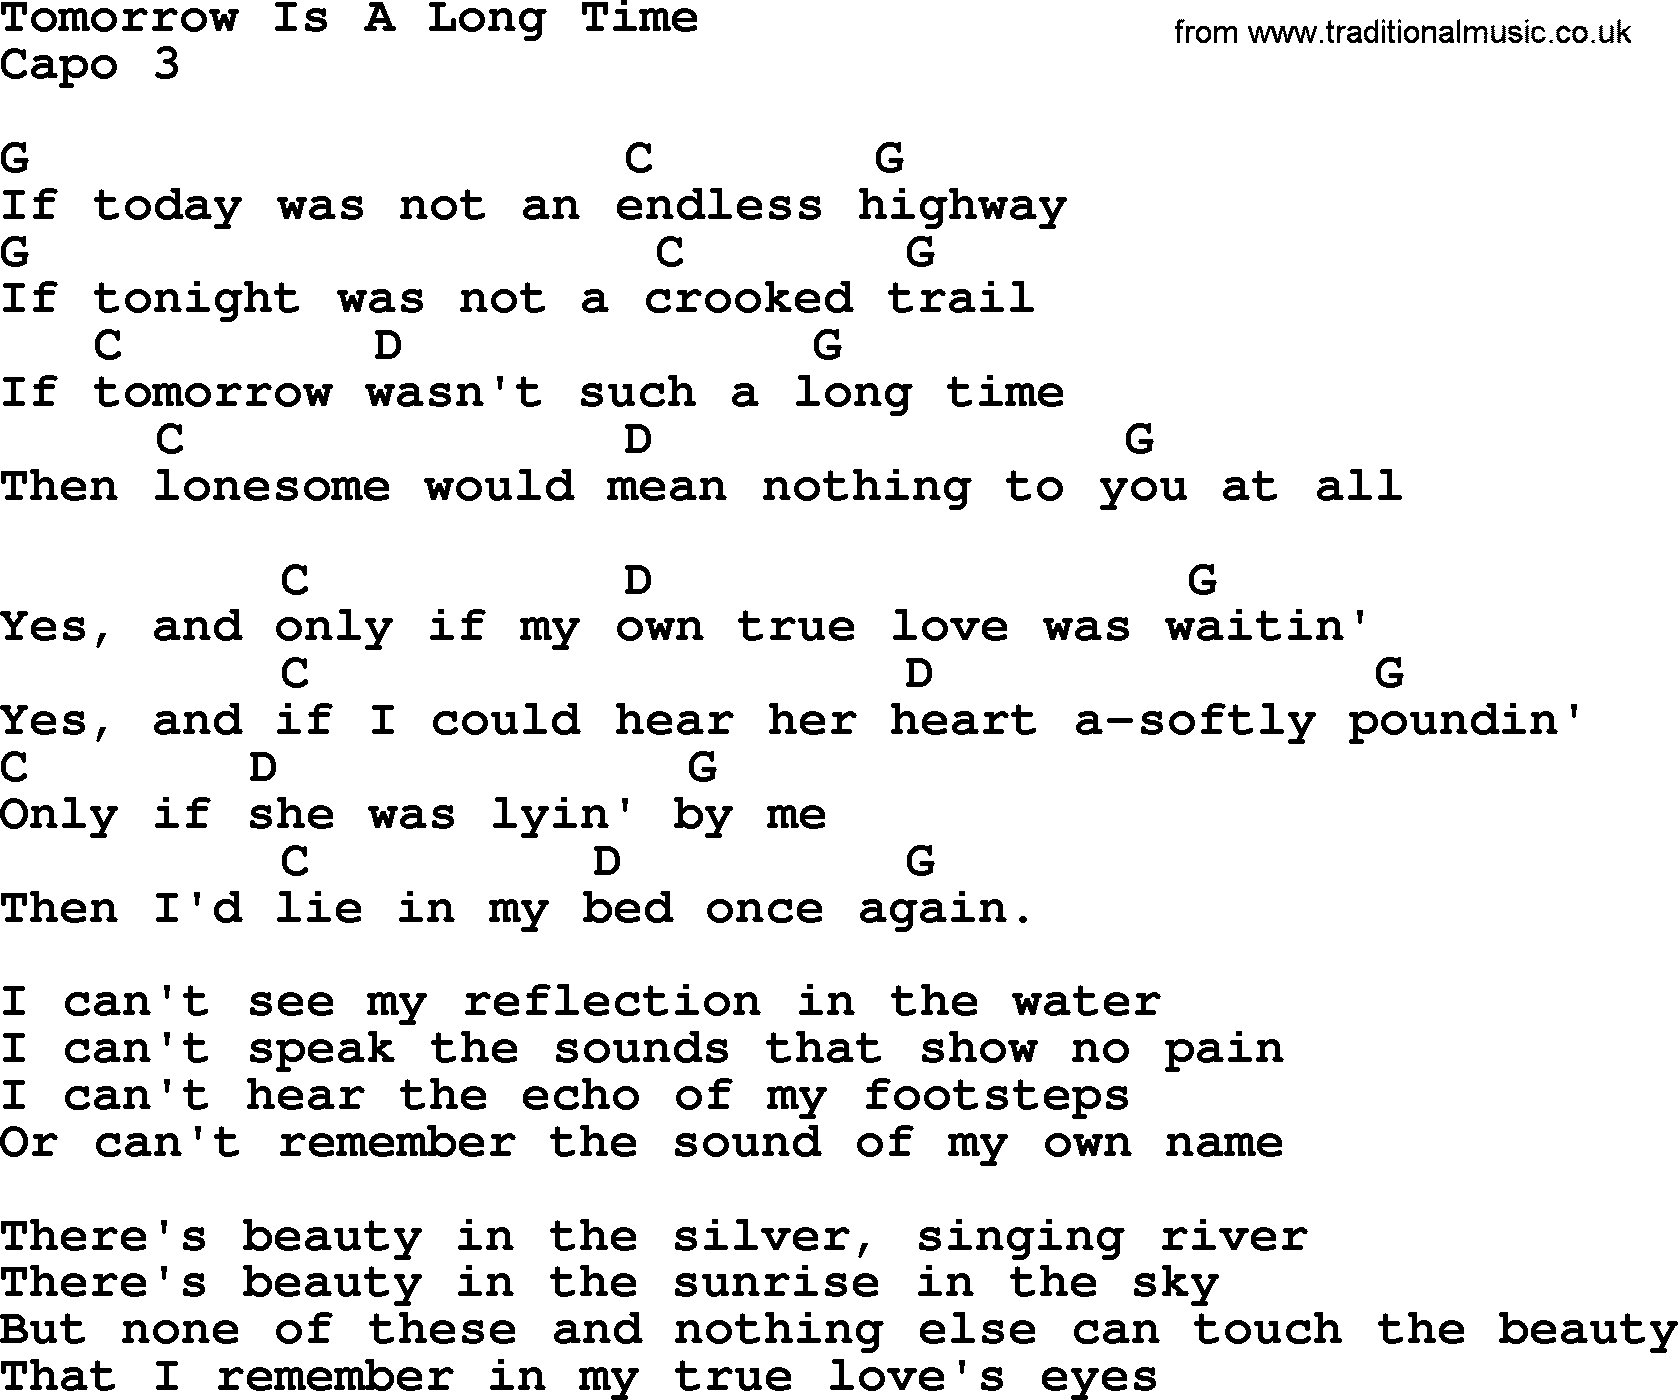 Bluegrass song: Tomorrow Is A Long Time, lyrics and chords